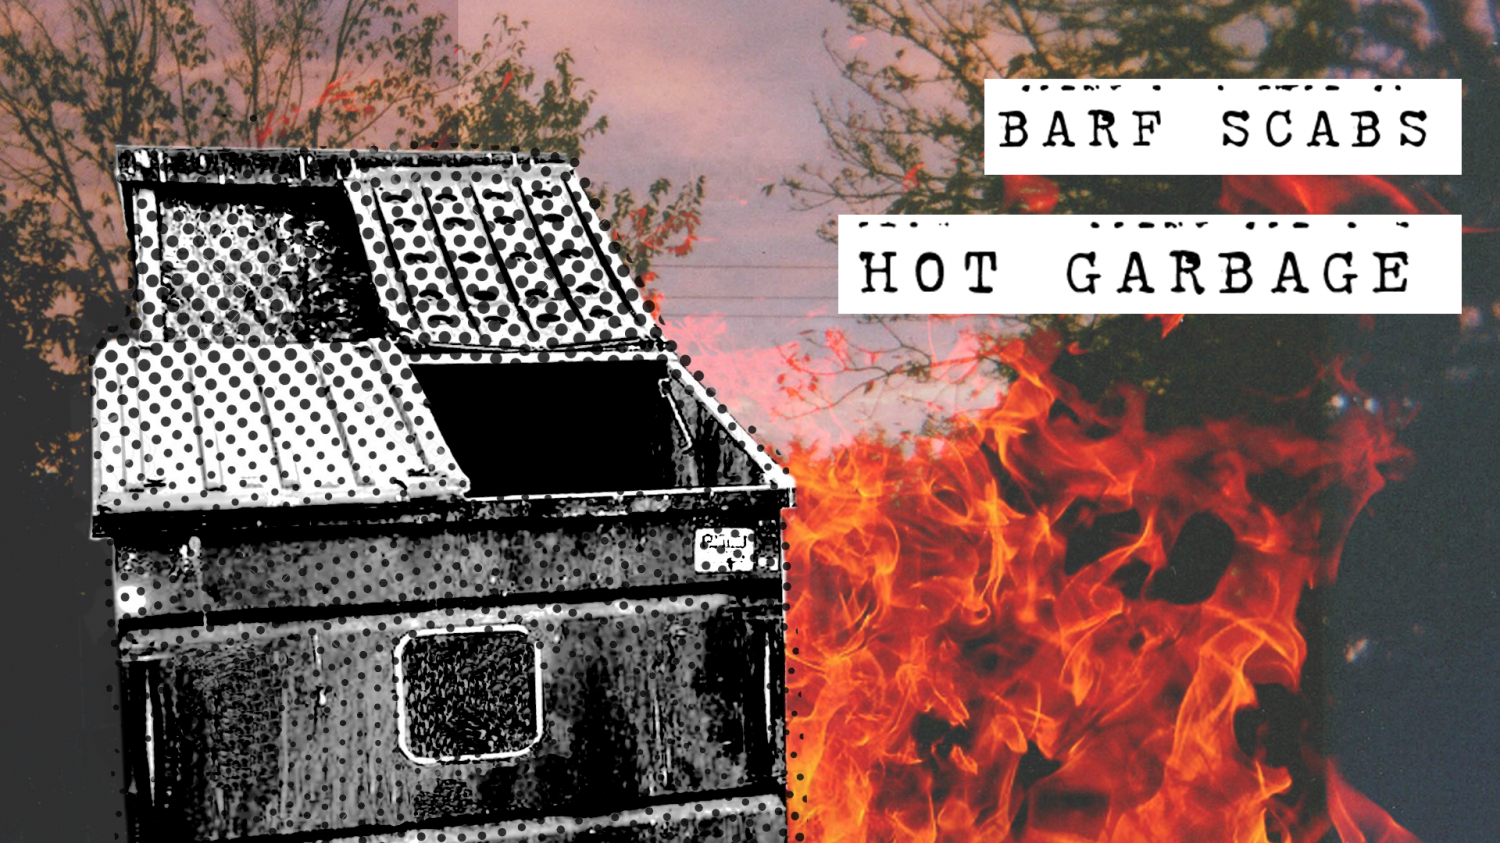 Barf Scabs - Hot Garbage Art Show